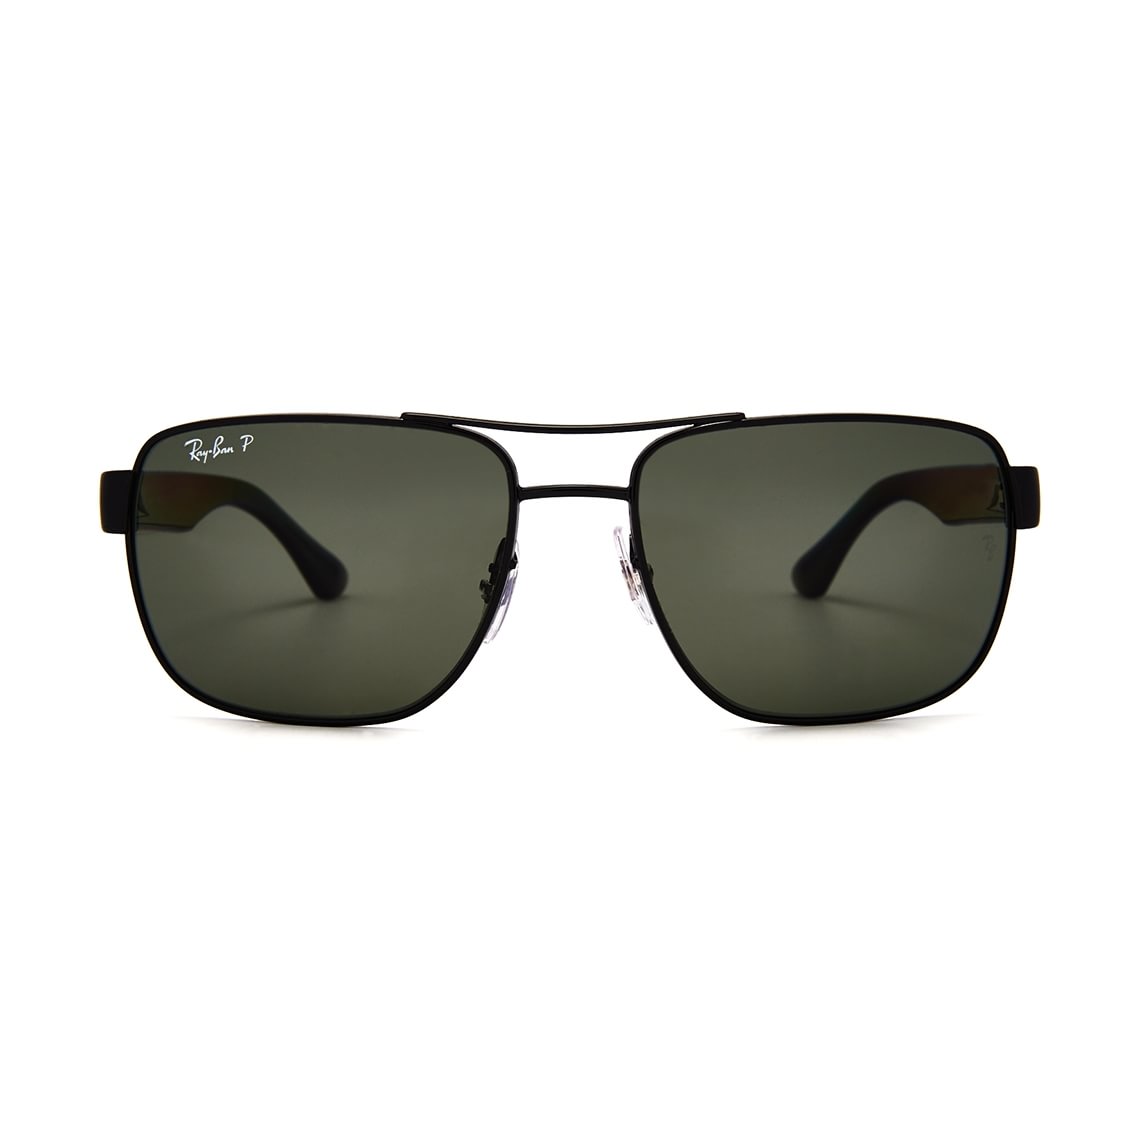 Ray-Ban RB3530 002/9A 58